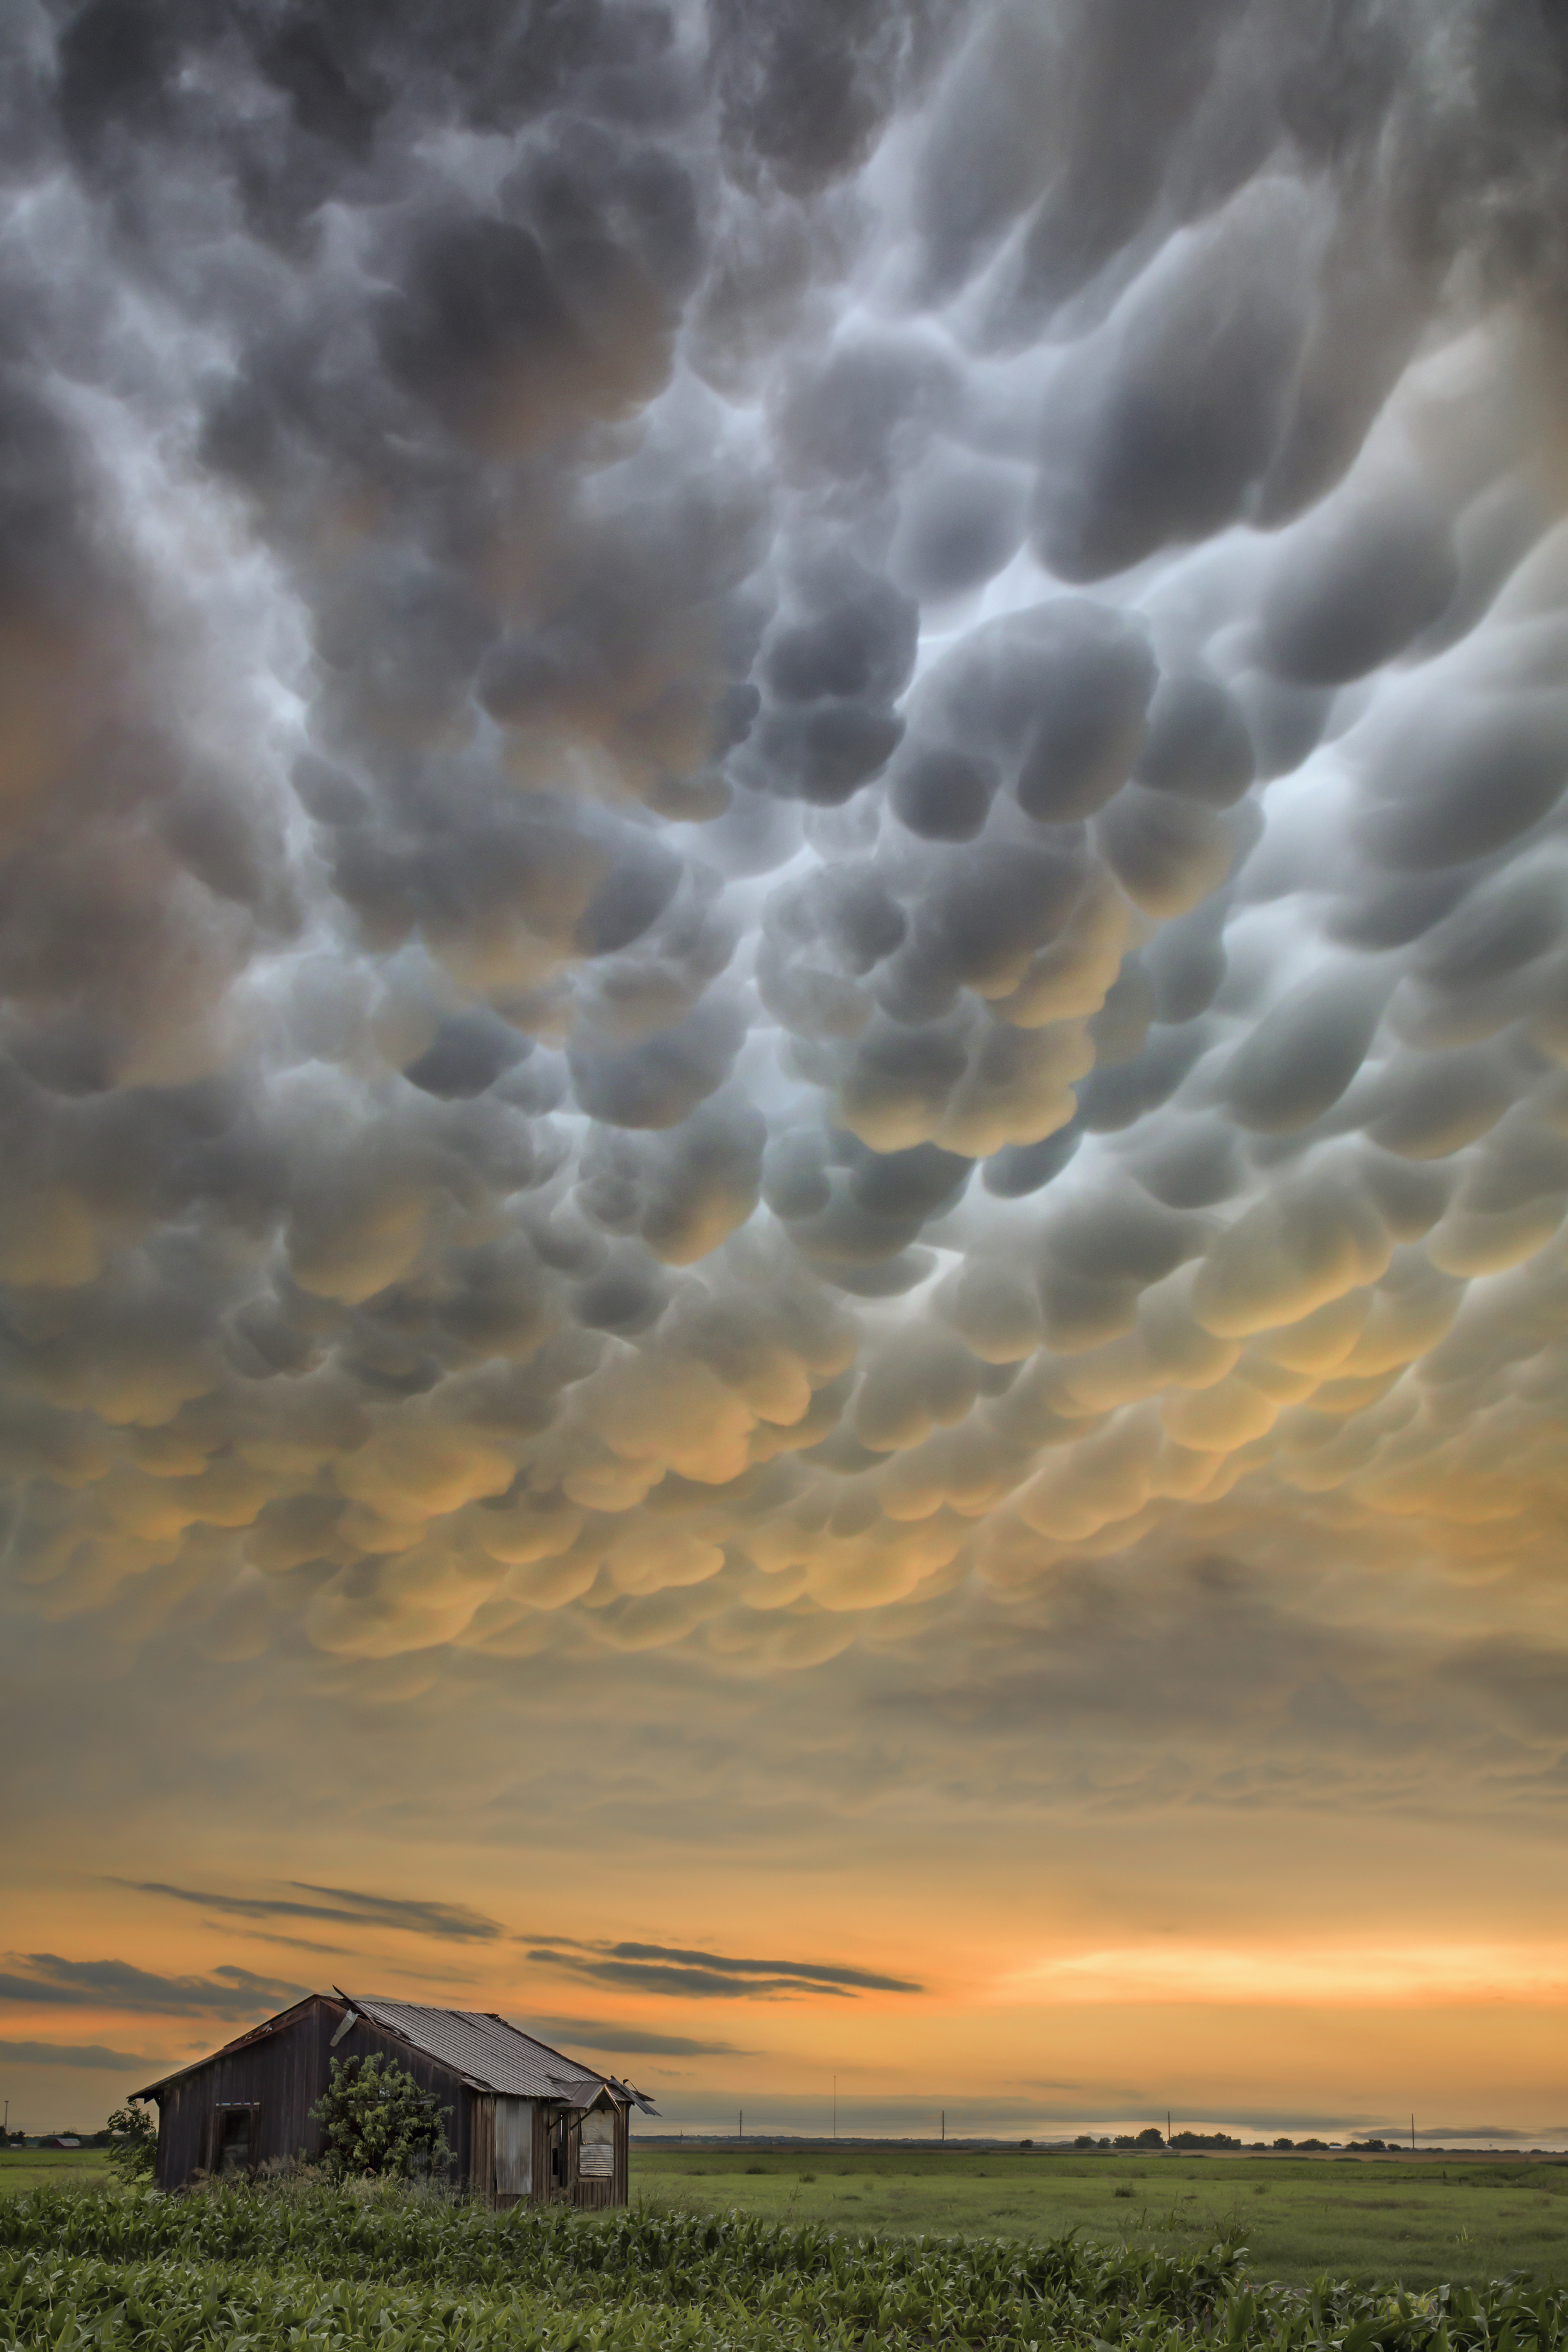  Mammatus clouds over Jonah, Texas after training tornadic supercells caused devastating flooding across the area.&nbsp; 